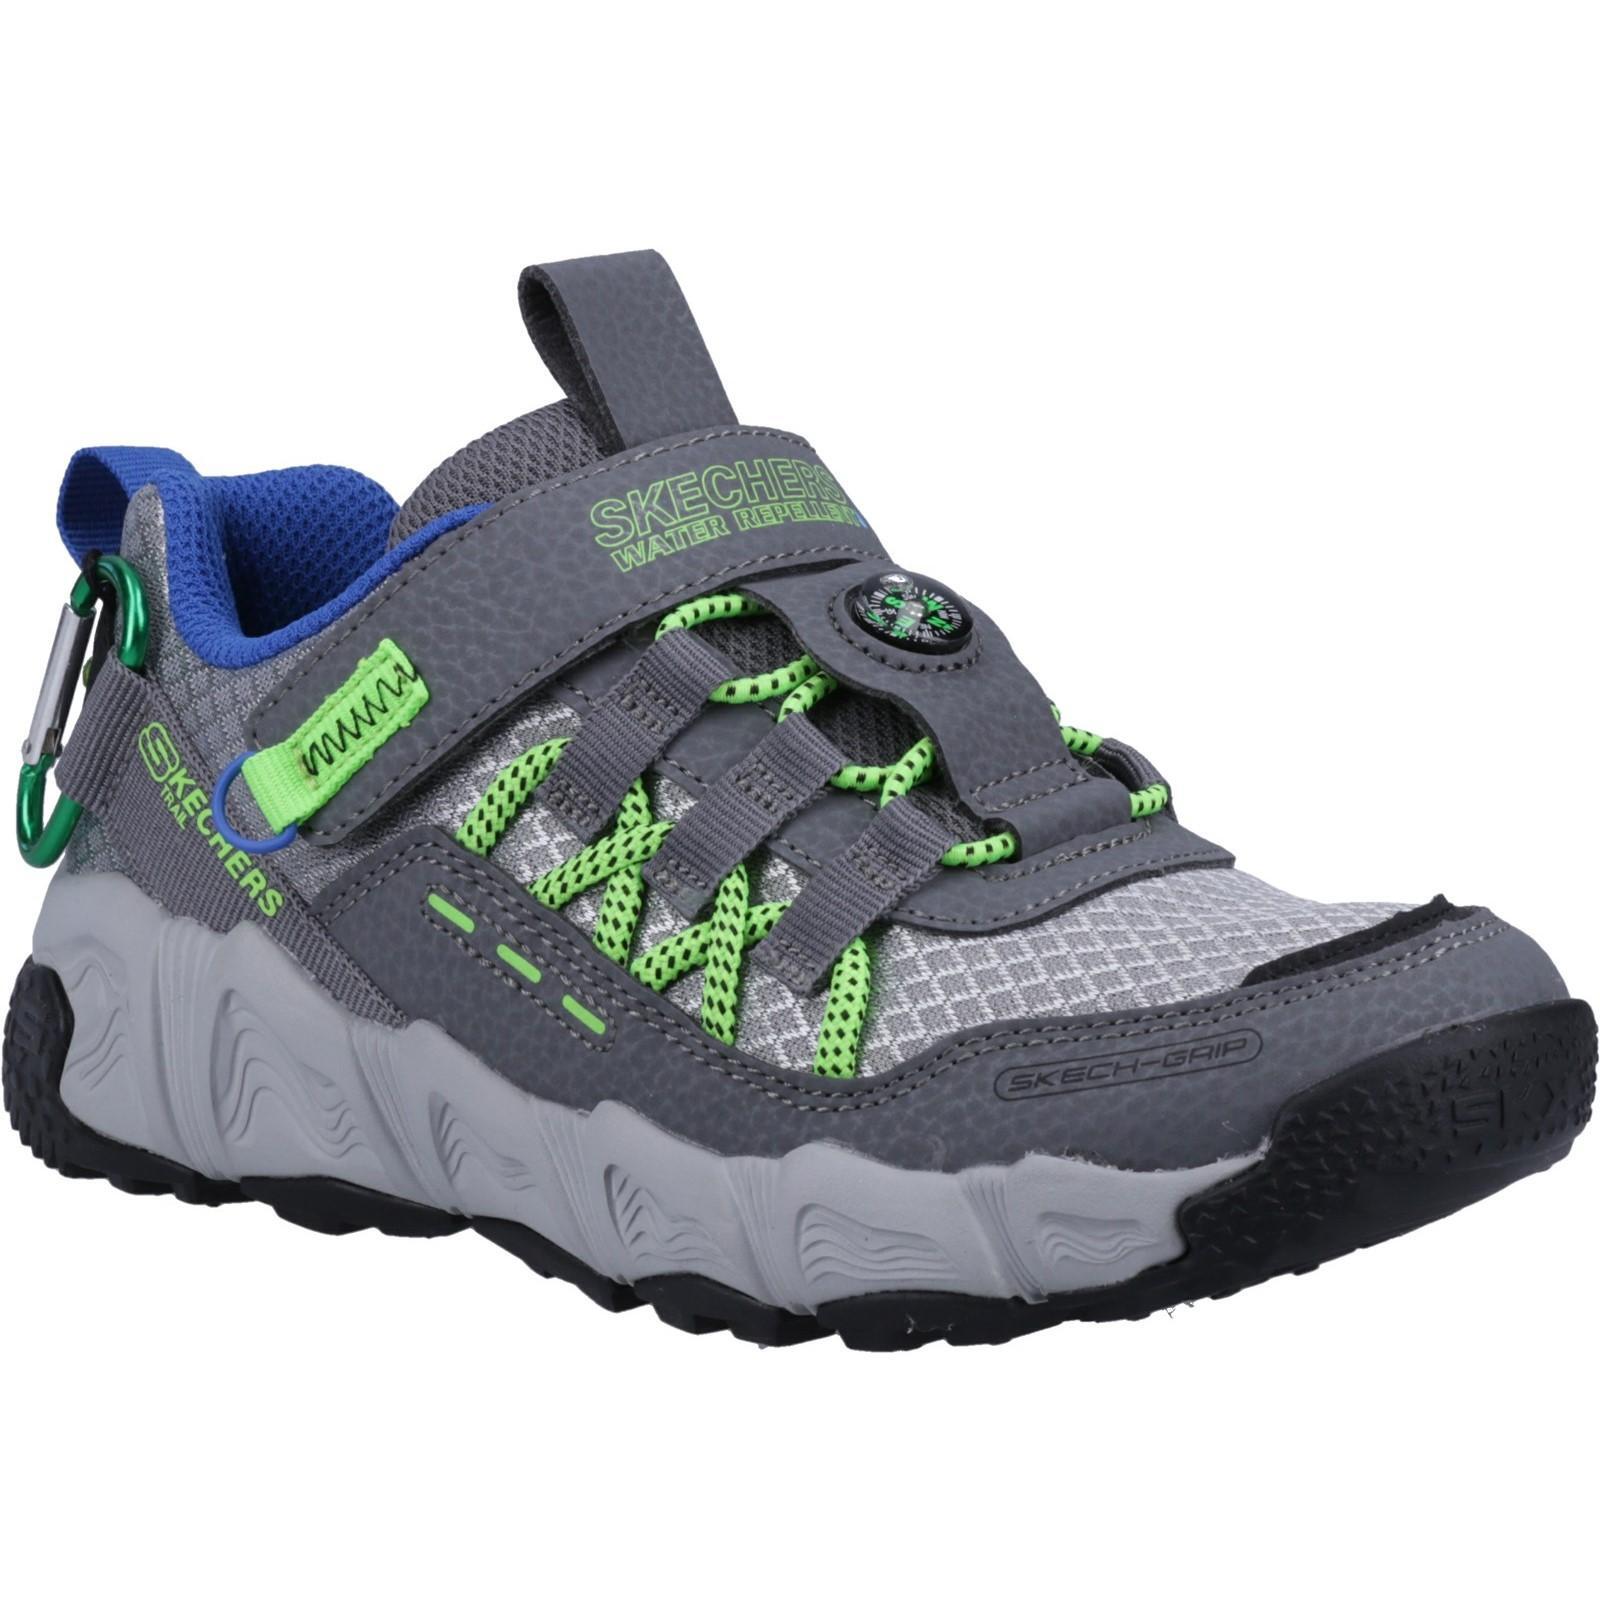 SKECHERS Boys Velocitrek Pro Scout Trainers (Charcoal/Lime)